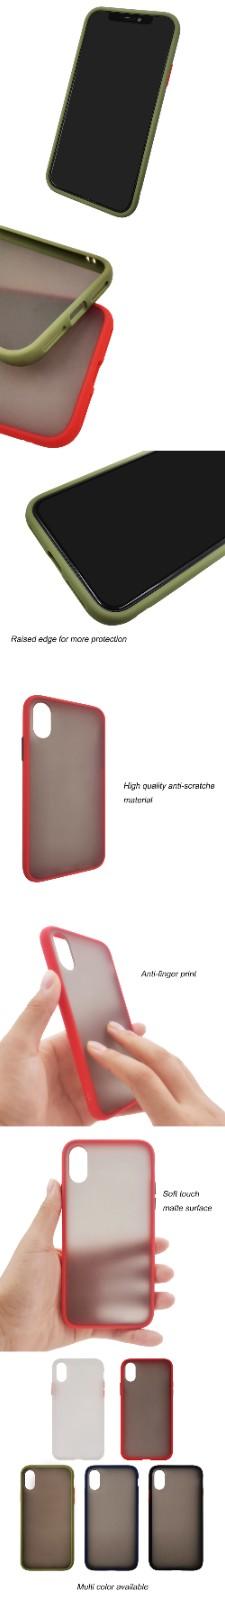 cell phone case companies from China for shop TenChen Tech